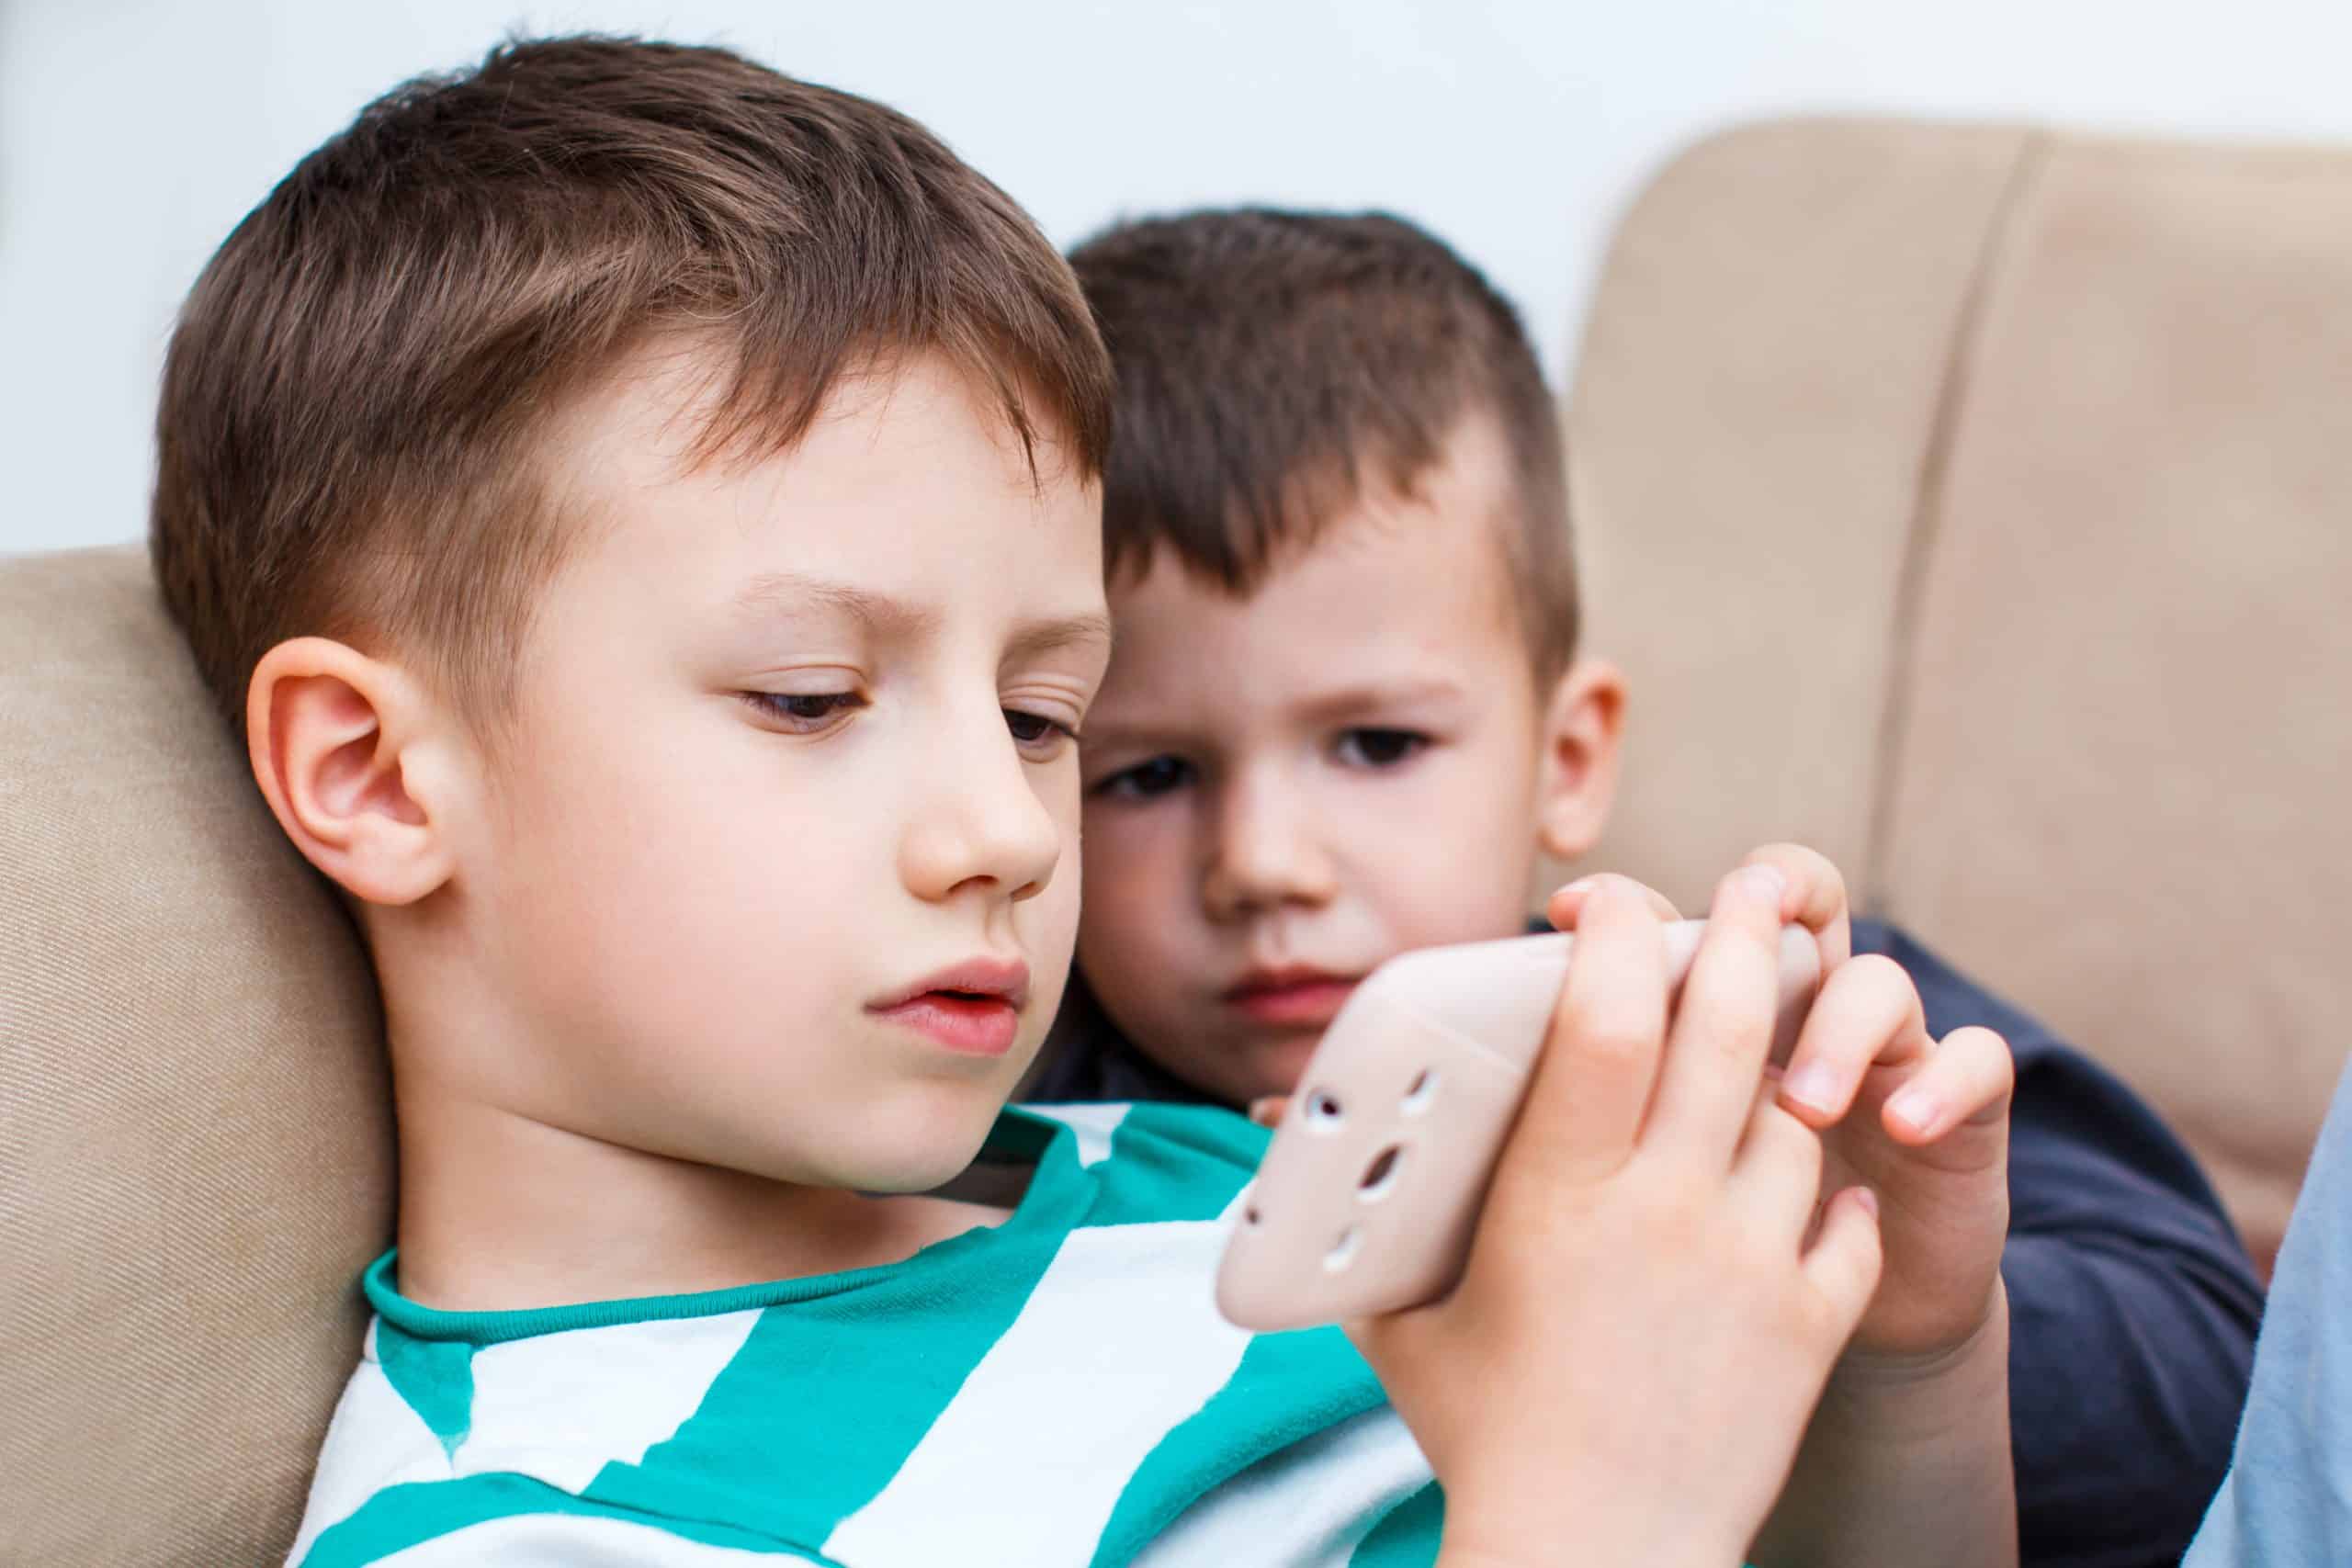 Two boys using a smartphone